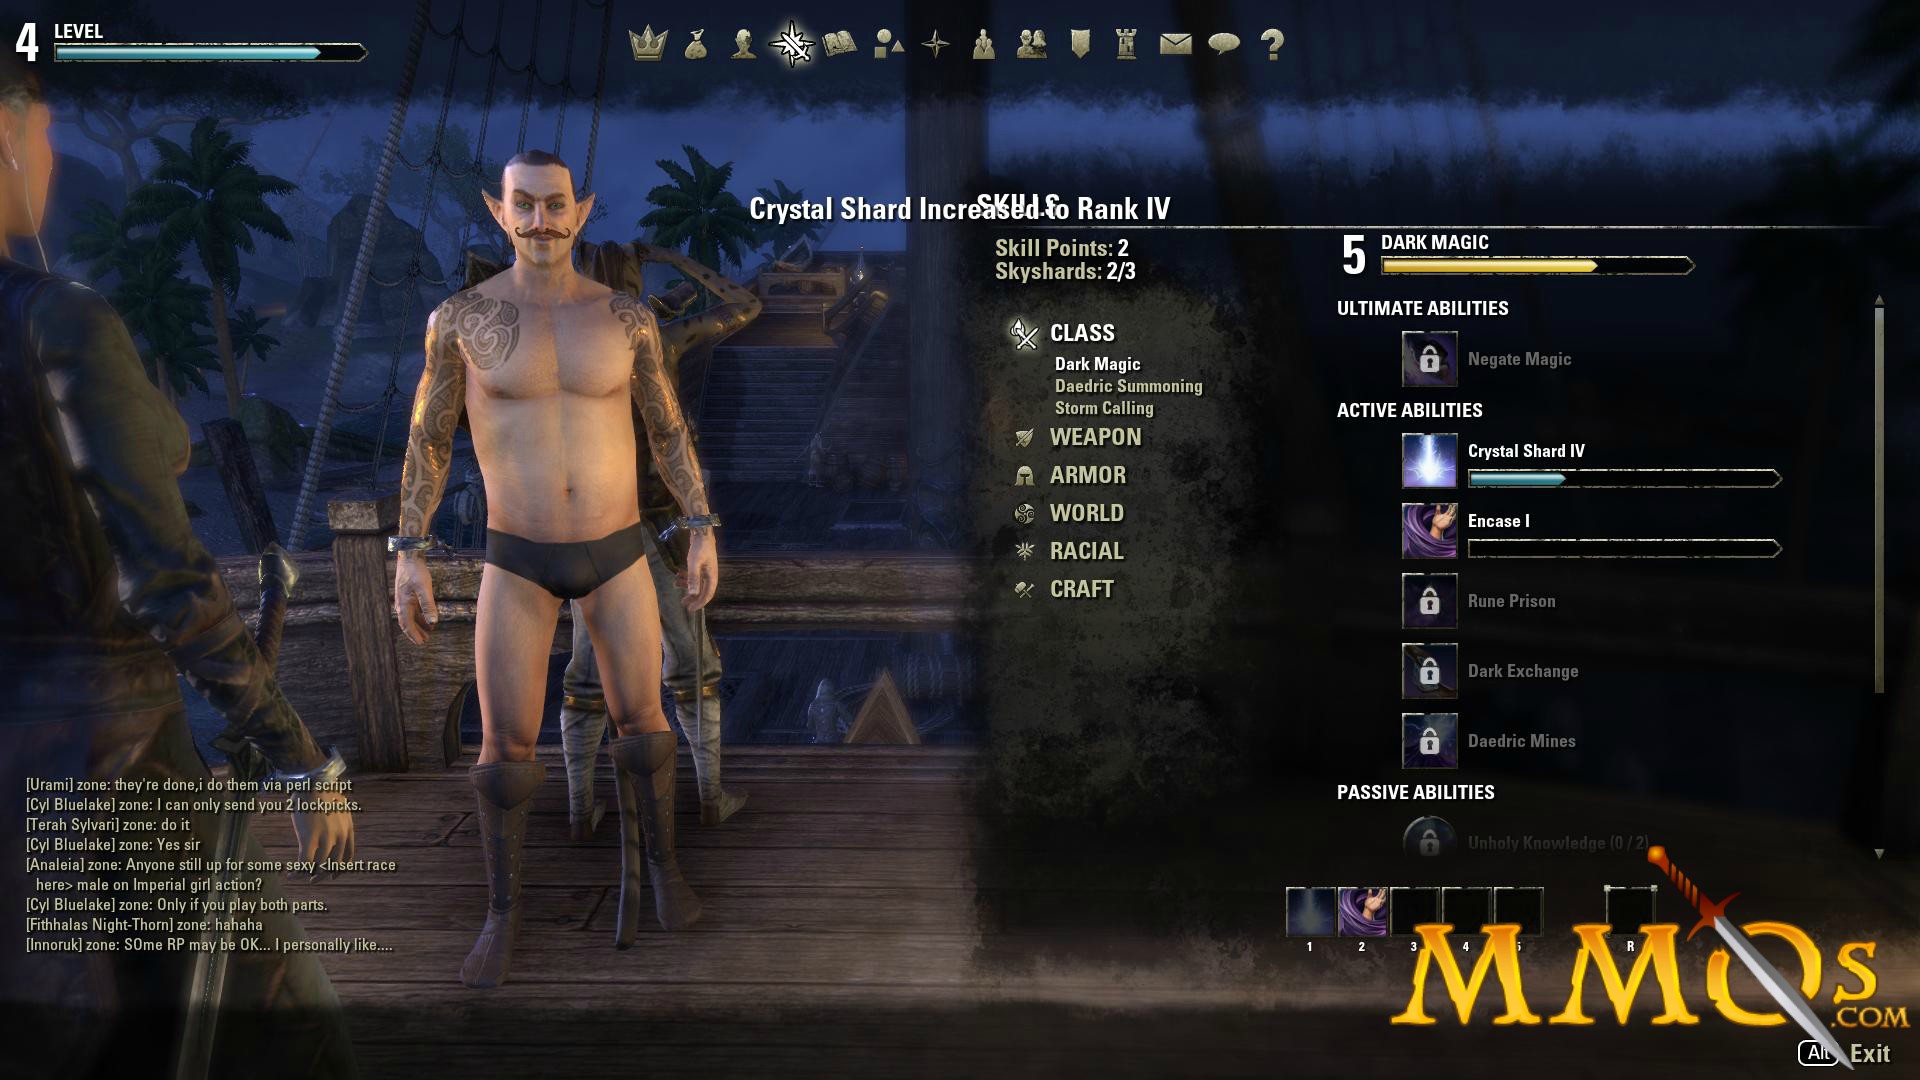 E3 2014: The Elder Scrolls Online offers small-scale PvP at cons